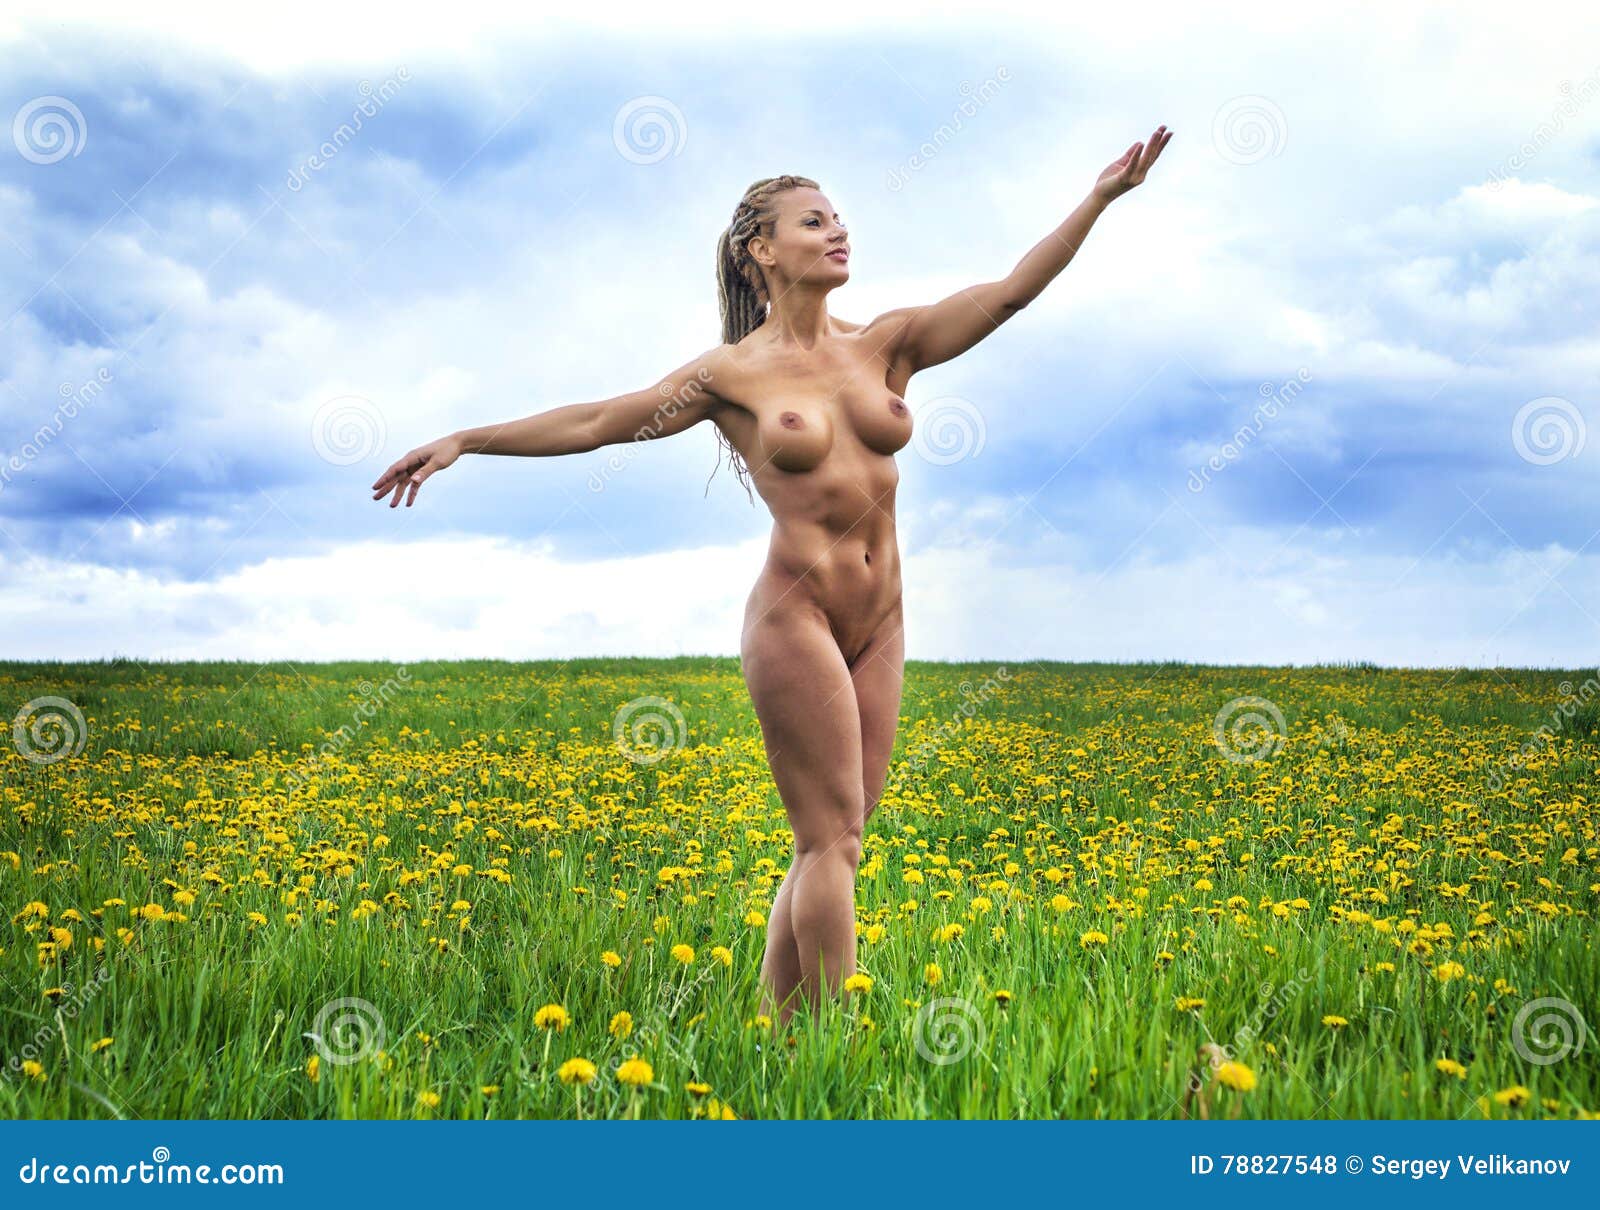 athletic woman nude